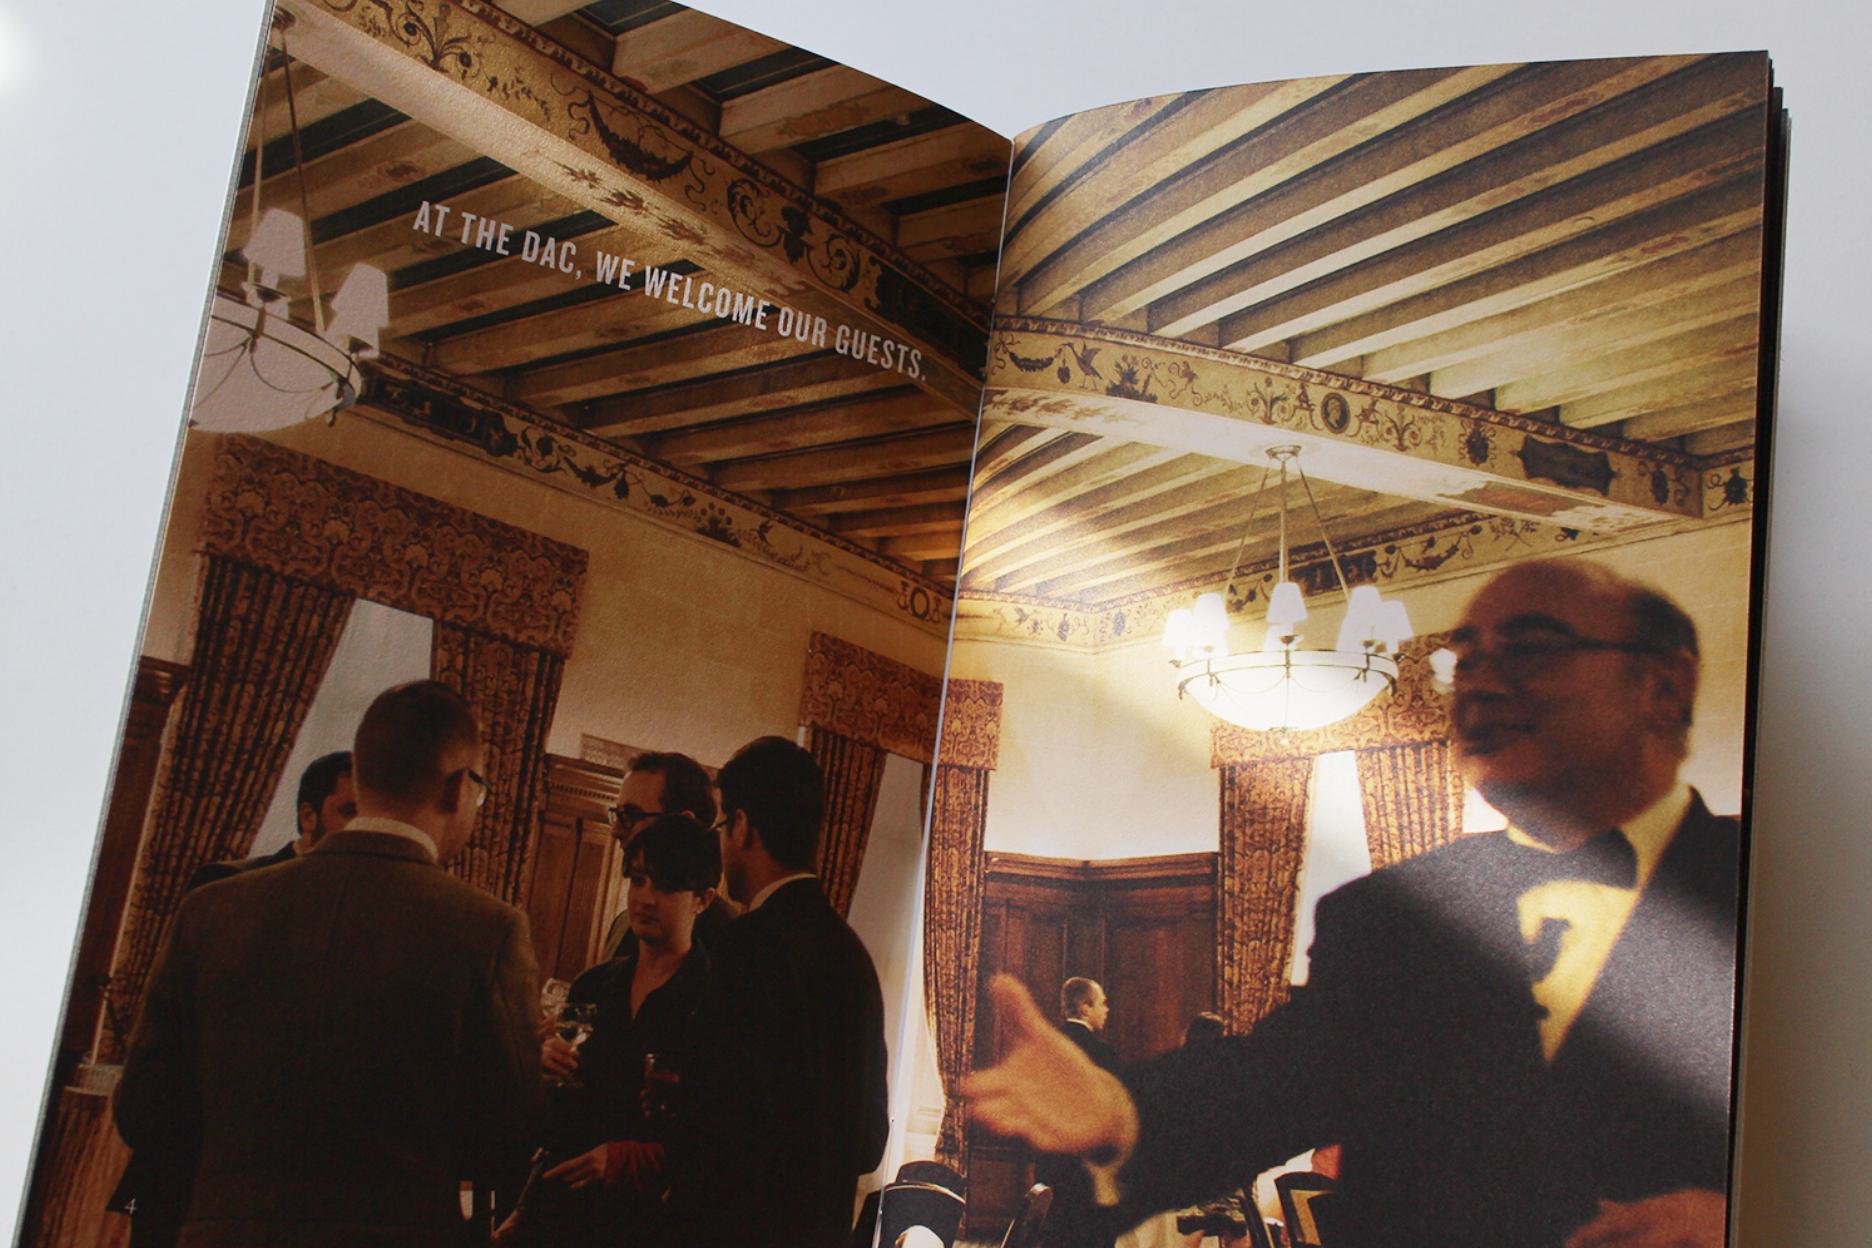 A spread from the brand book - 'At DAC, we welcome our guests.'